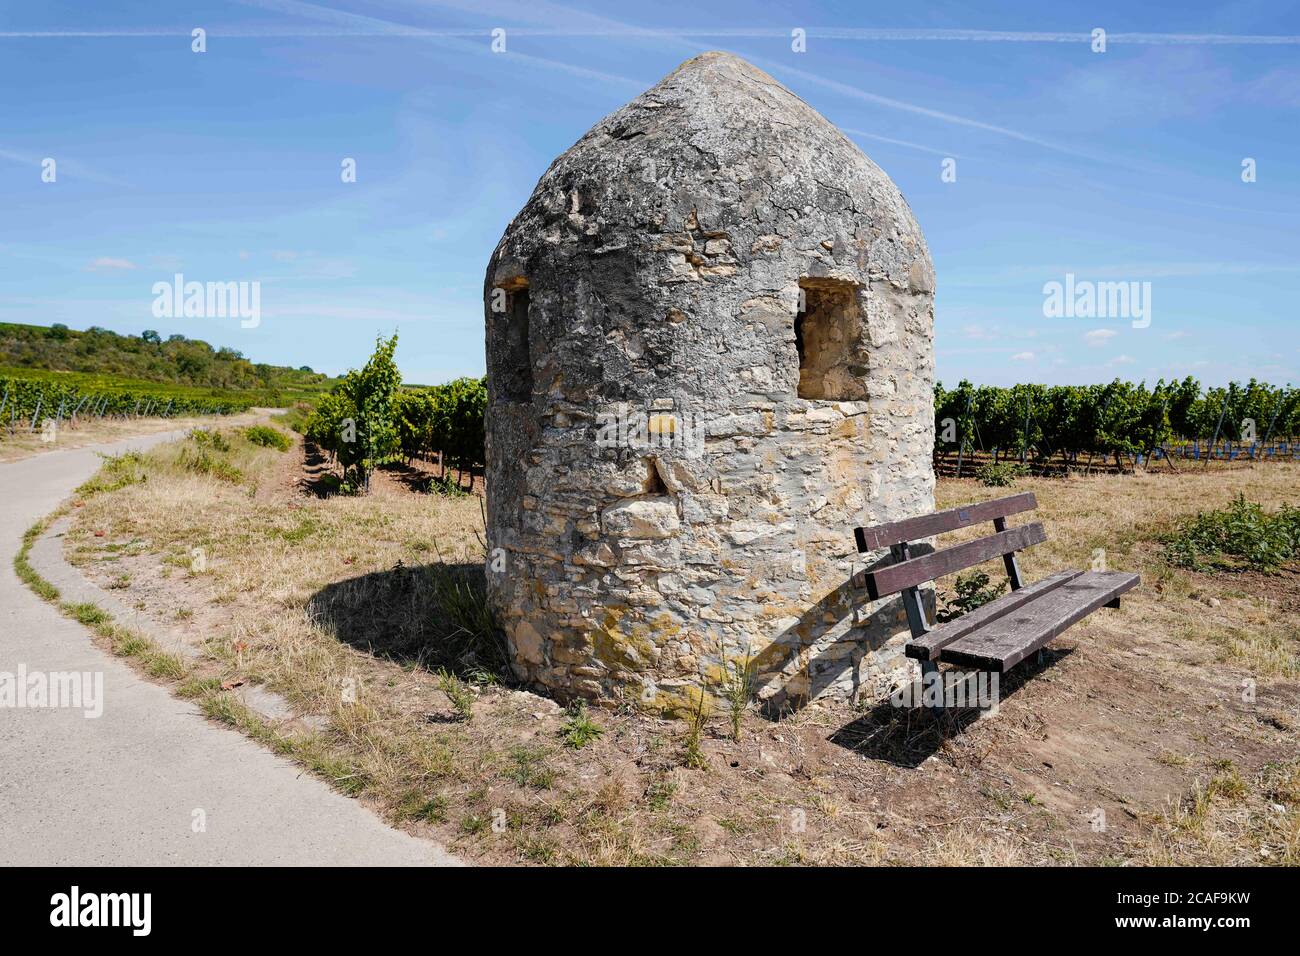 29 July 2020, Rhineland-Palatinate, Bockenheim an der Weinstraße: A trullo, also known as a round house, stands in the vineyards between the villages of Wachenheim and Bockenheim an der Weinstraße. (to dpa "Trullo shines in the vineyard") Photo: Uwe Anspach/dpa Stock Photo